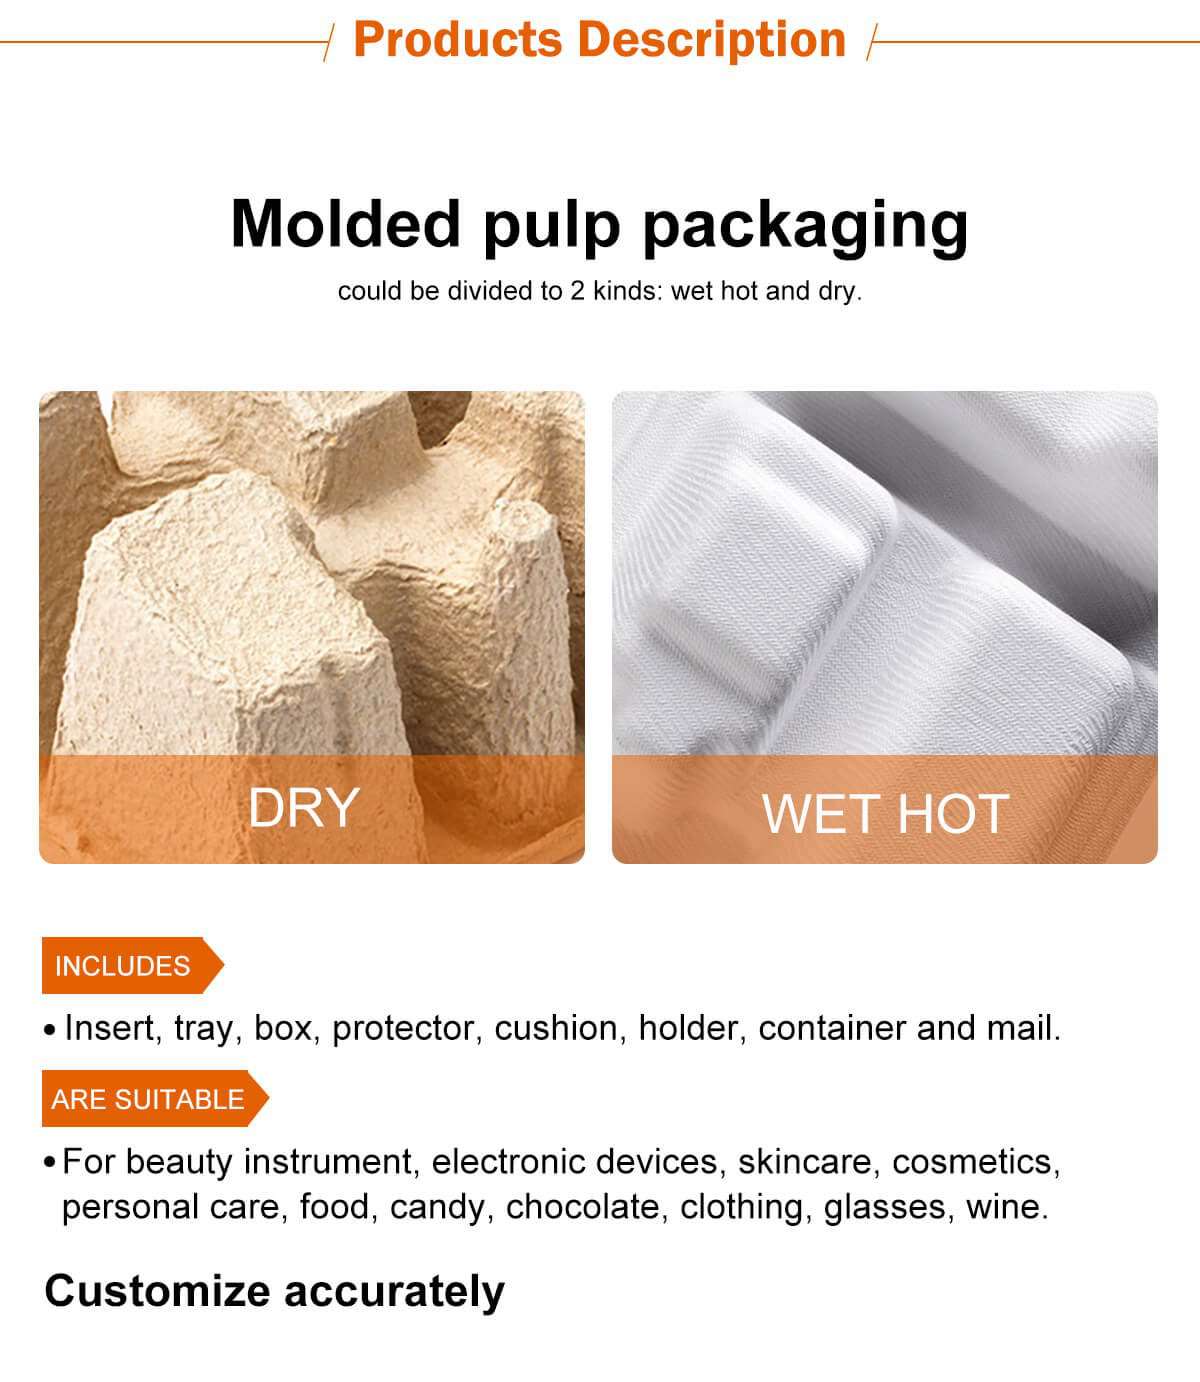 Molded pulp packaging could be divided to 2 kinds:wet hot and dry